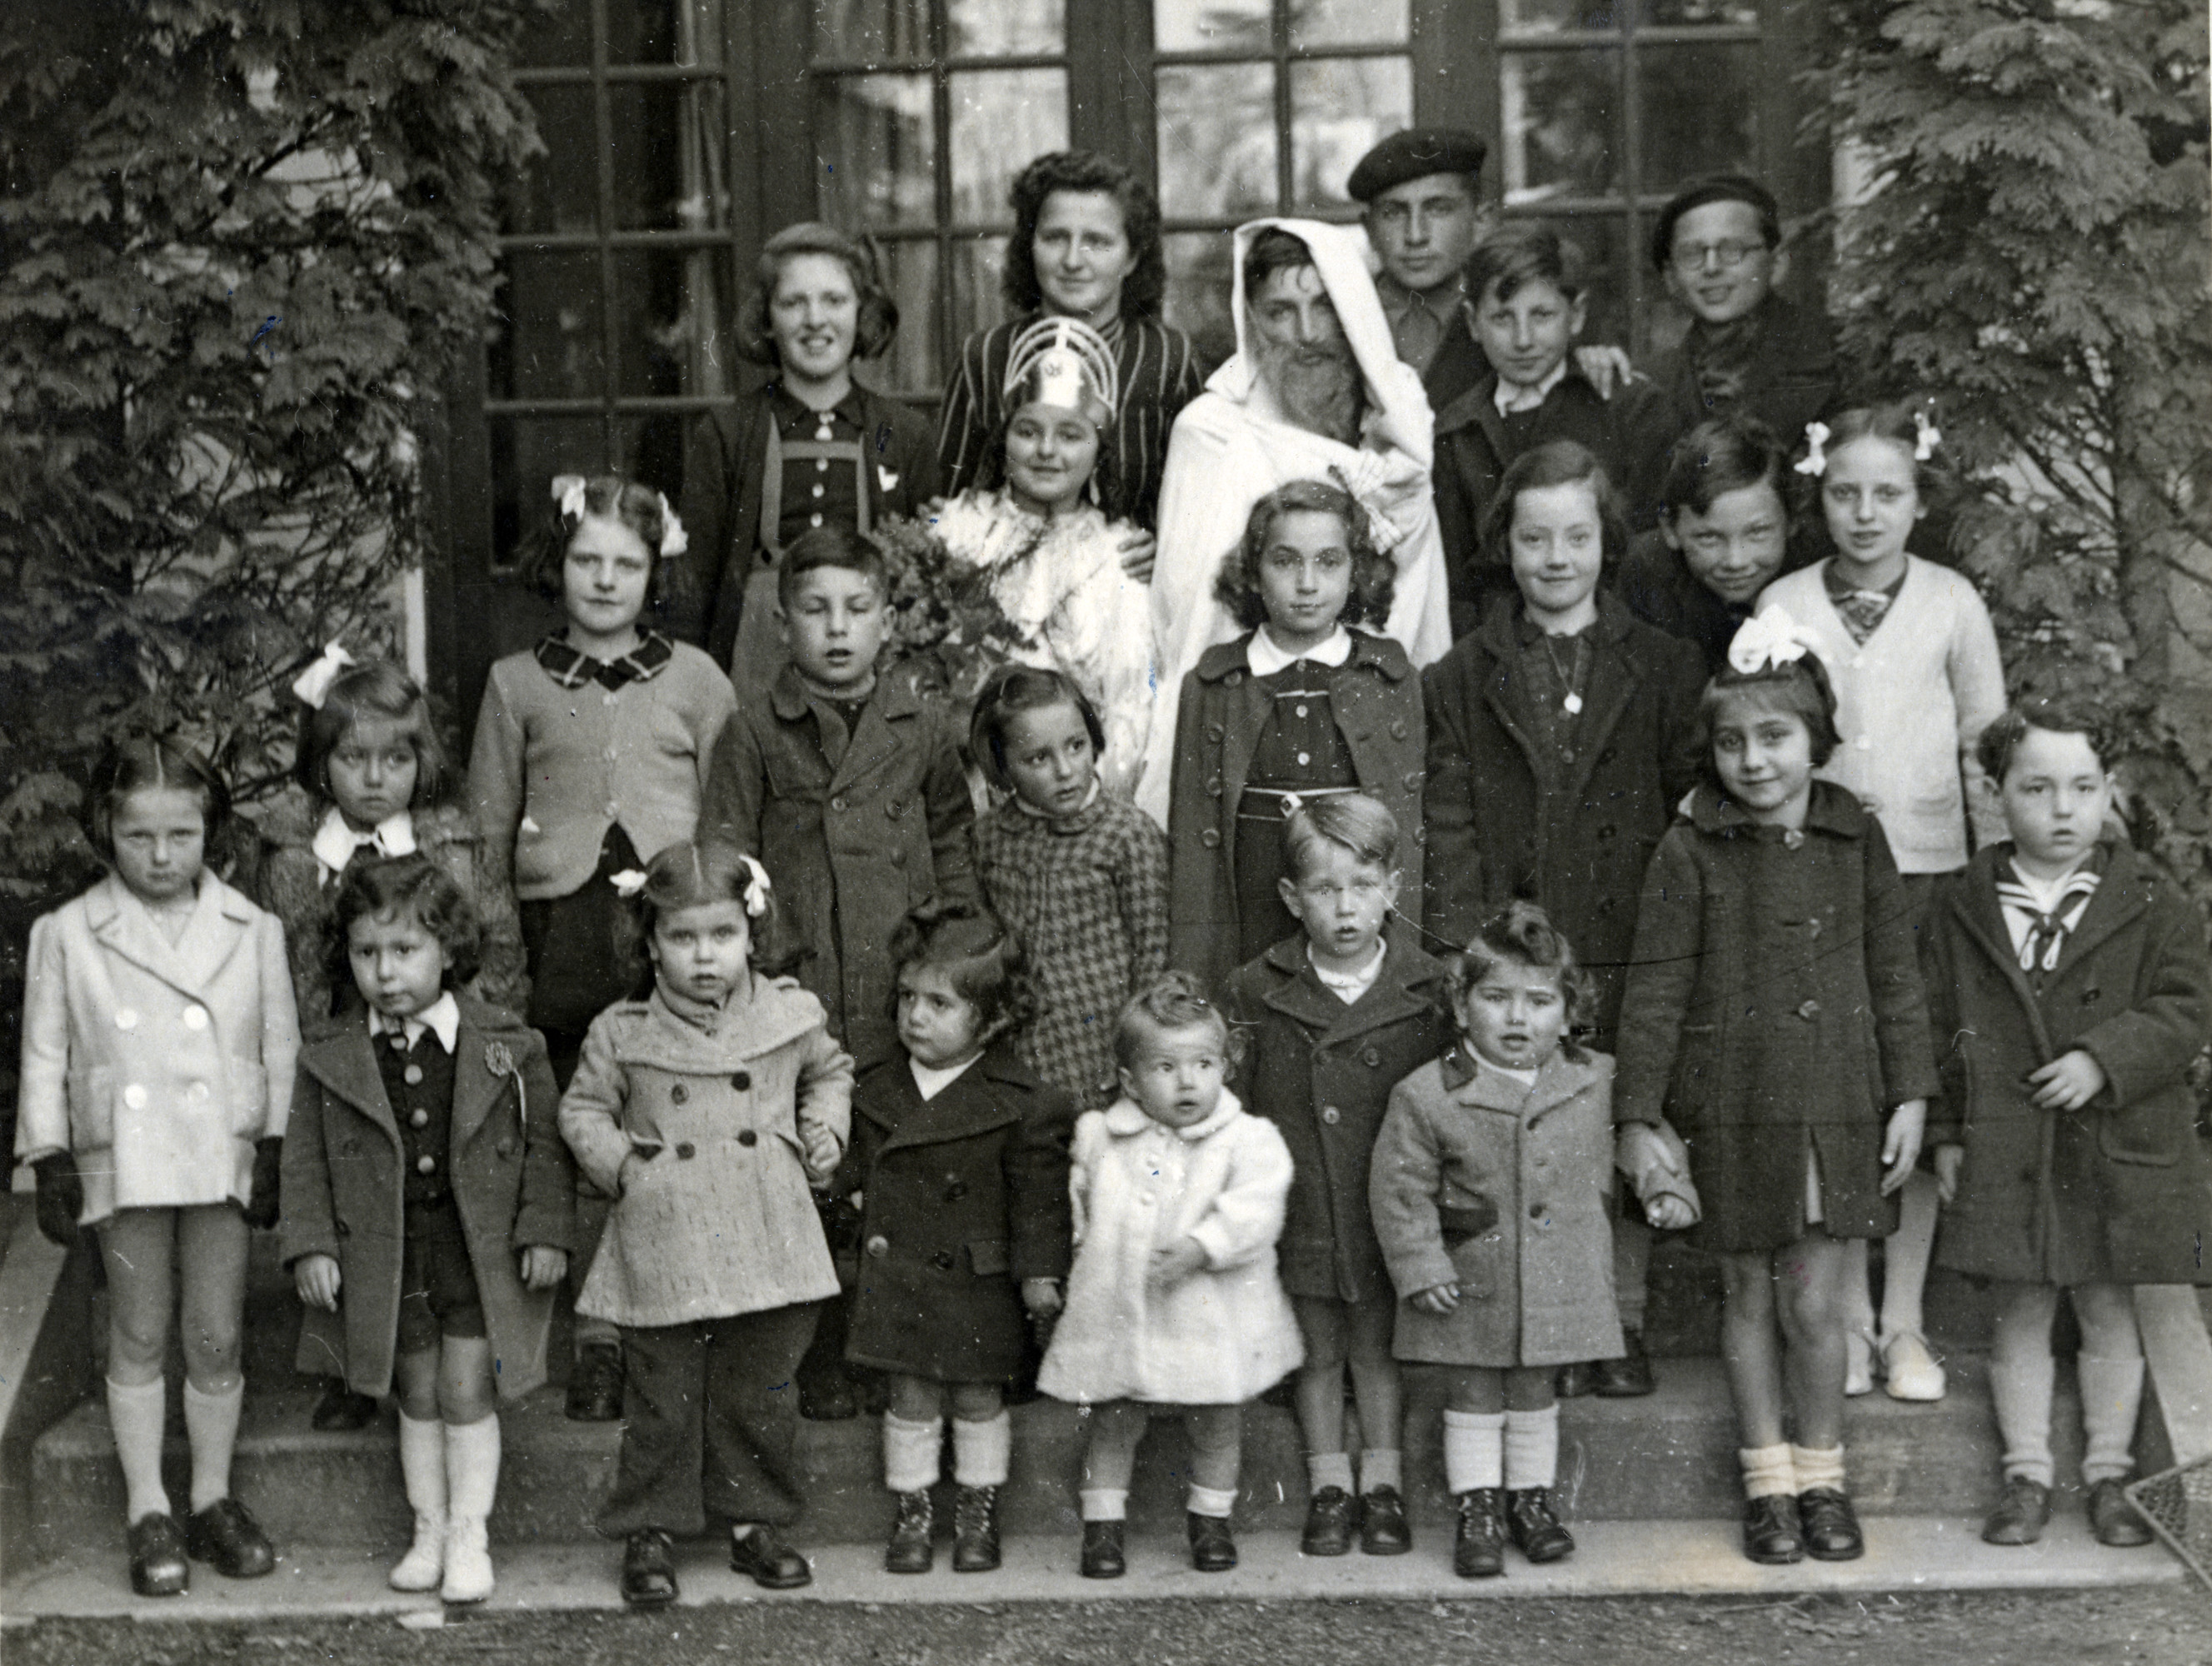 Jewish children celebrate Purim, probably shortly after the war.

Claire is in the second row from the back, on the far left, wearing a crown and dressed as Queen Esther.